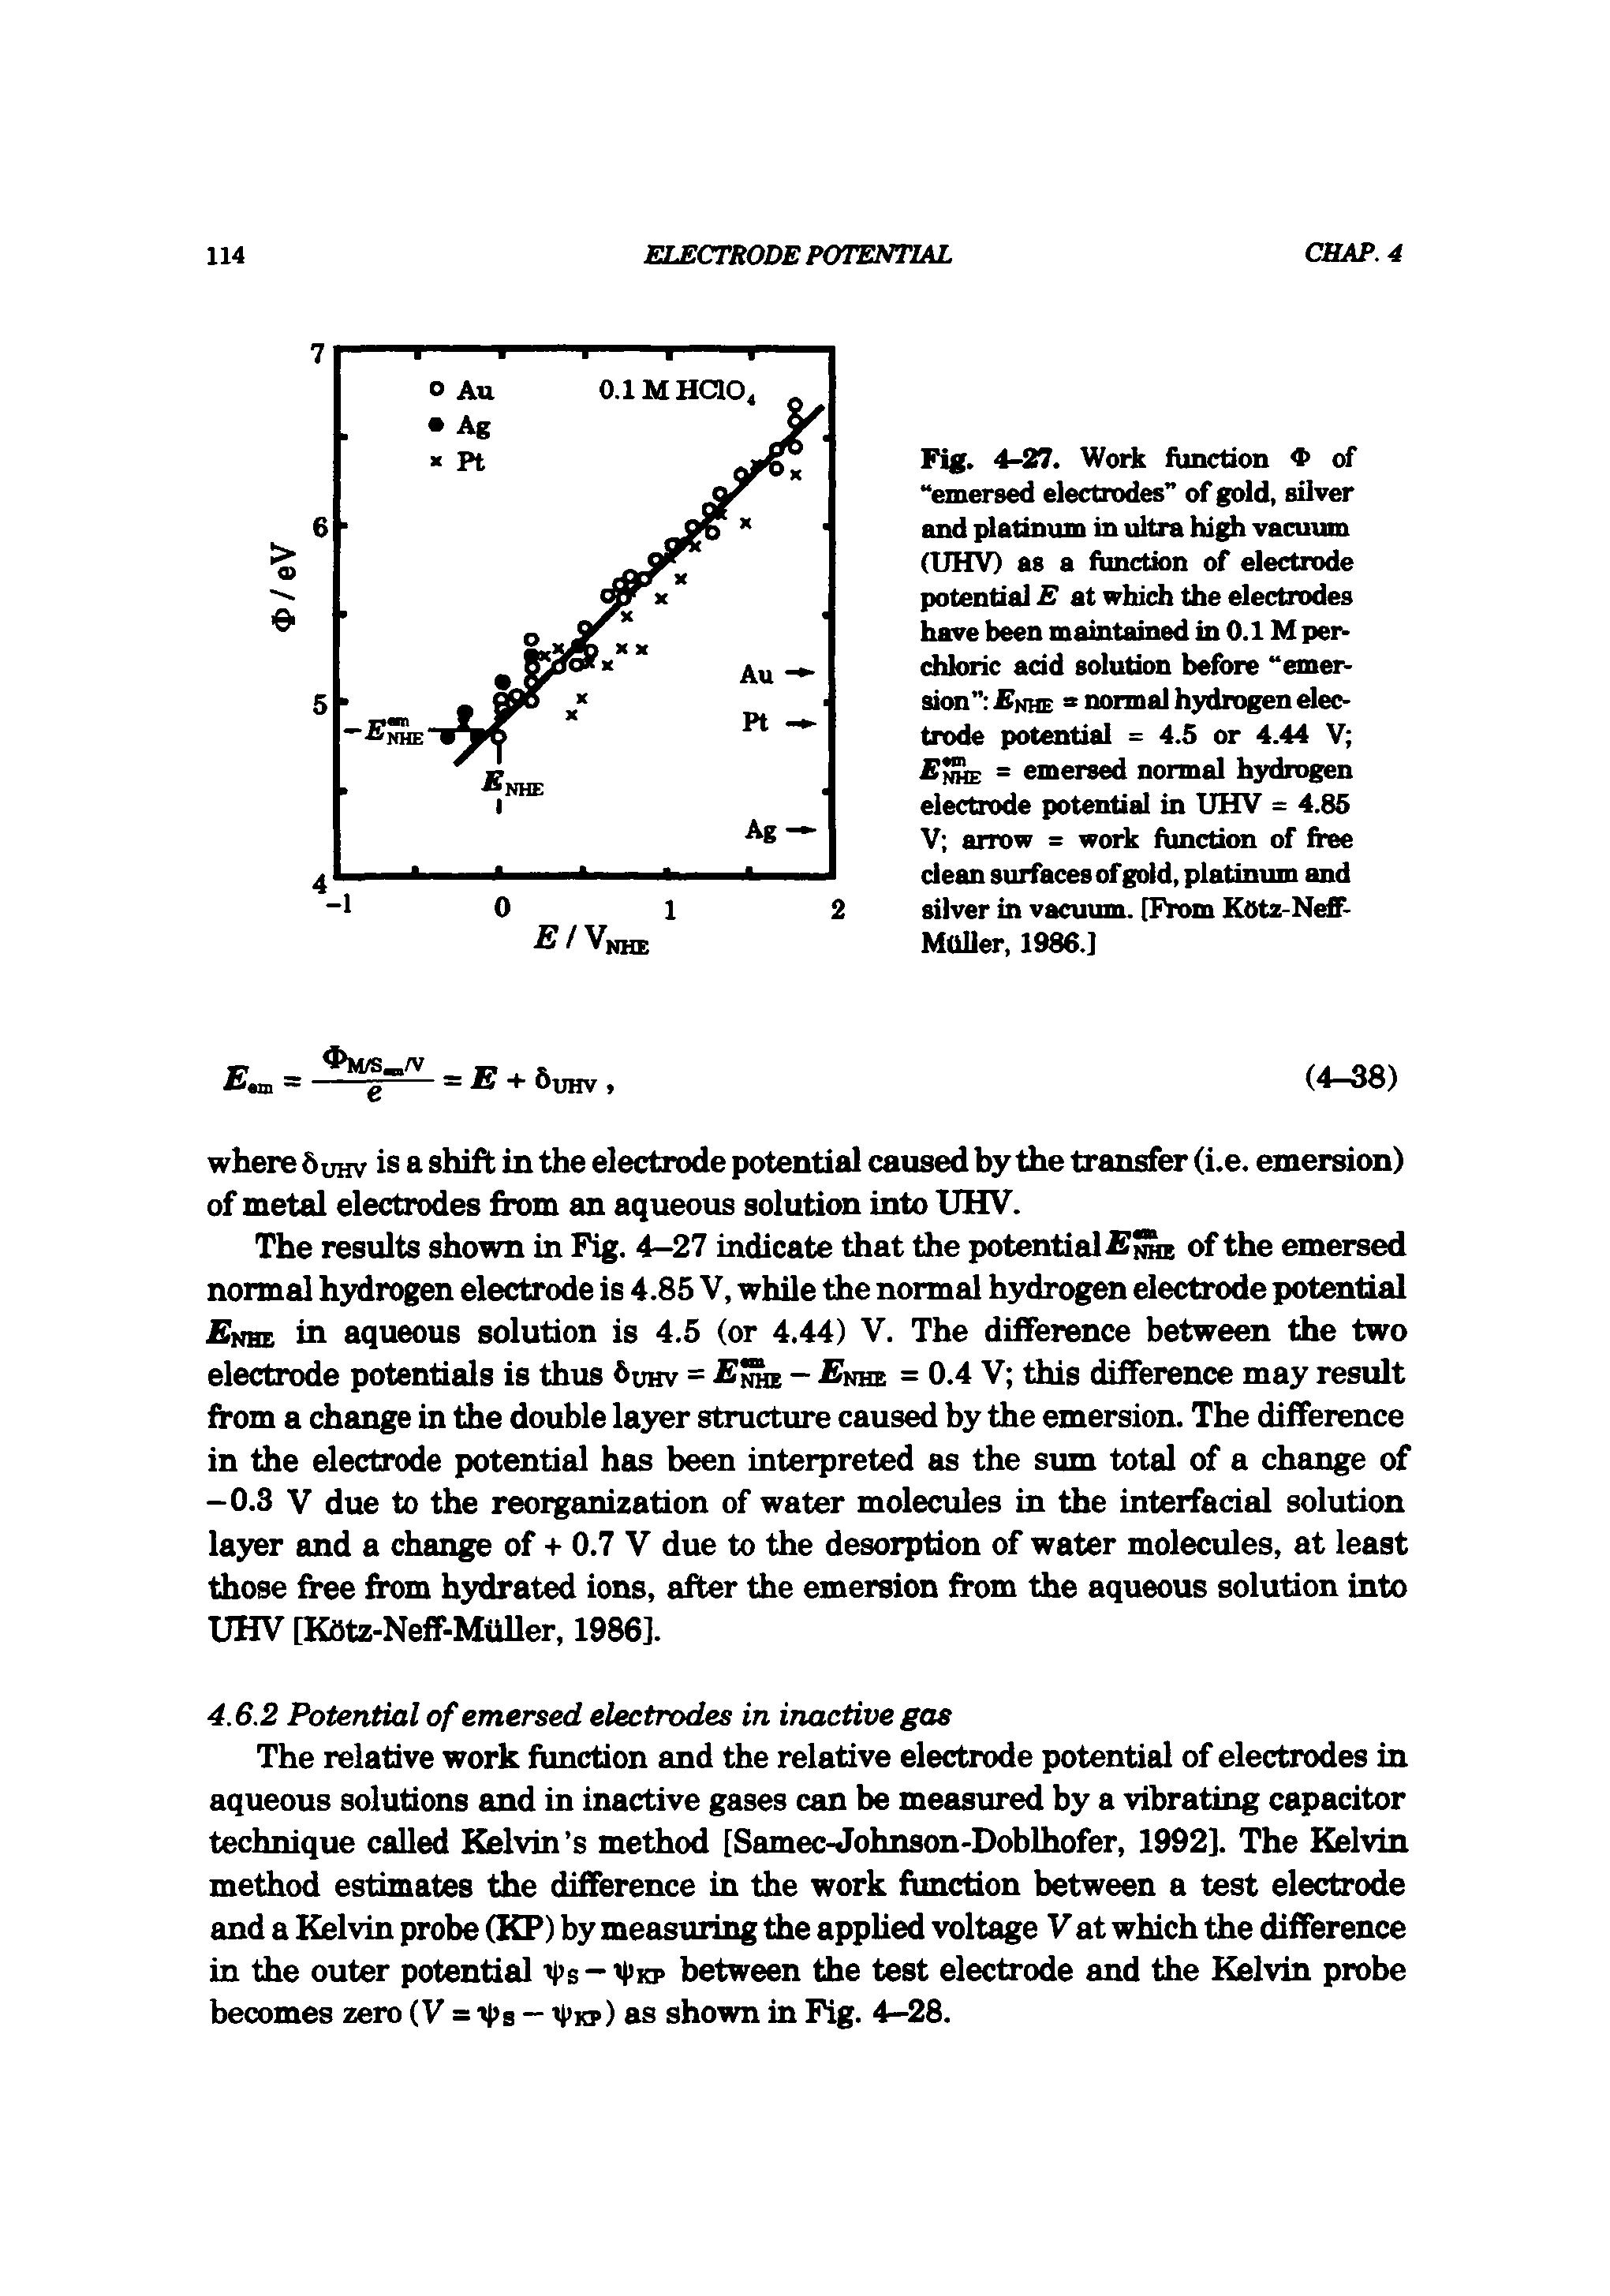 Fig. 4-27. Work fimction 4> of emersed electrodes of gold, silver and platinum in ultra hig vacuum (UHV) as a function of electrode potential E at which the electrodes have been maintained in 0.1 M per chloric add solution before emersion Esm => normal hydrogen electrode potential = 4.5 or 4.44 V Cnhe = emersed normal h3rdiogen electrode potential in UHV = 4.85 V arrow = work f mction of free dean surfaces of gold, platinum and silver in vacuum. [From Kota-Neff-Moller, 1986.]...